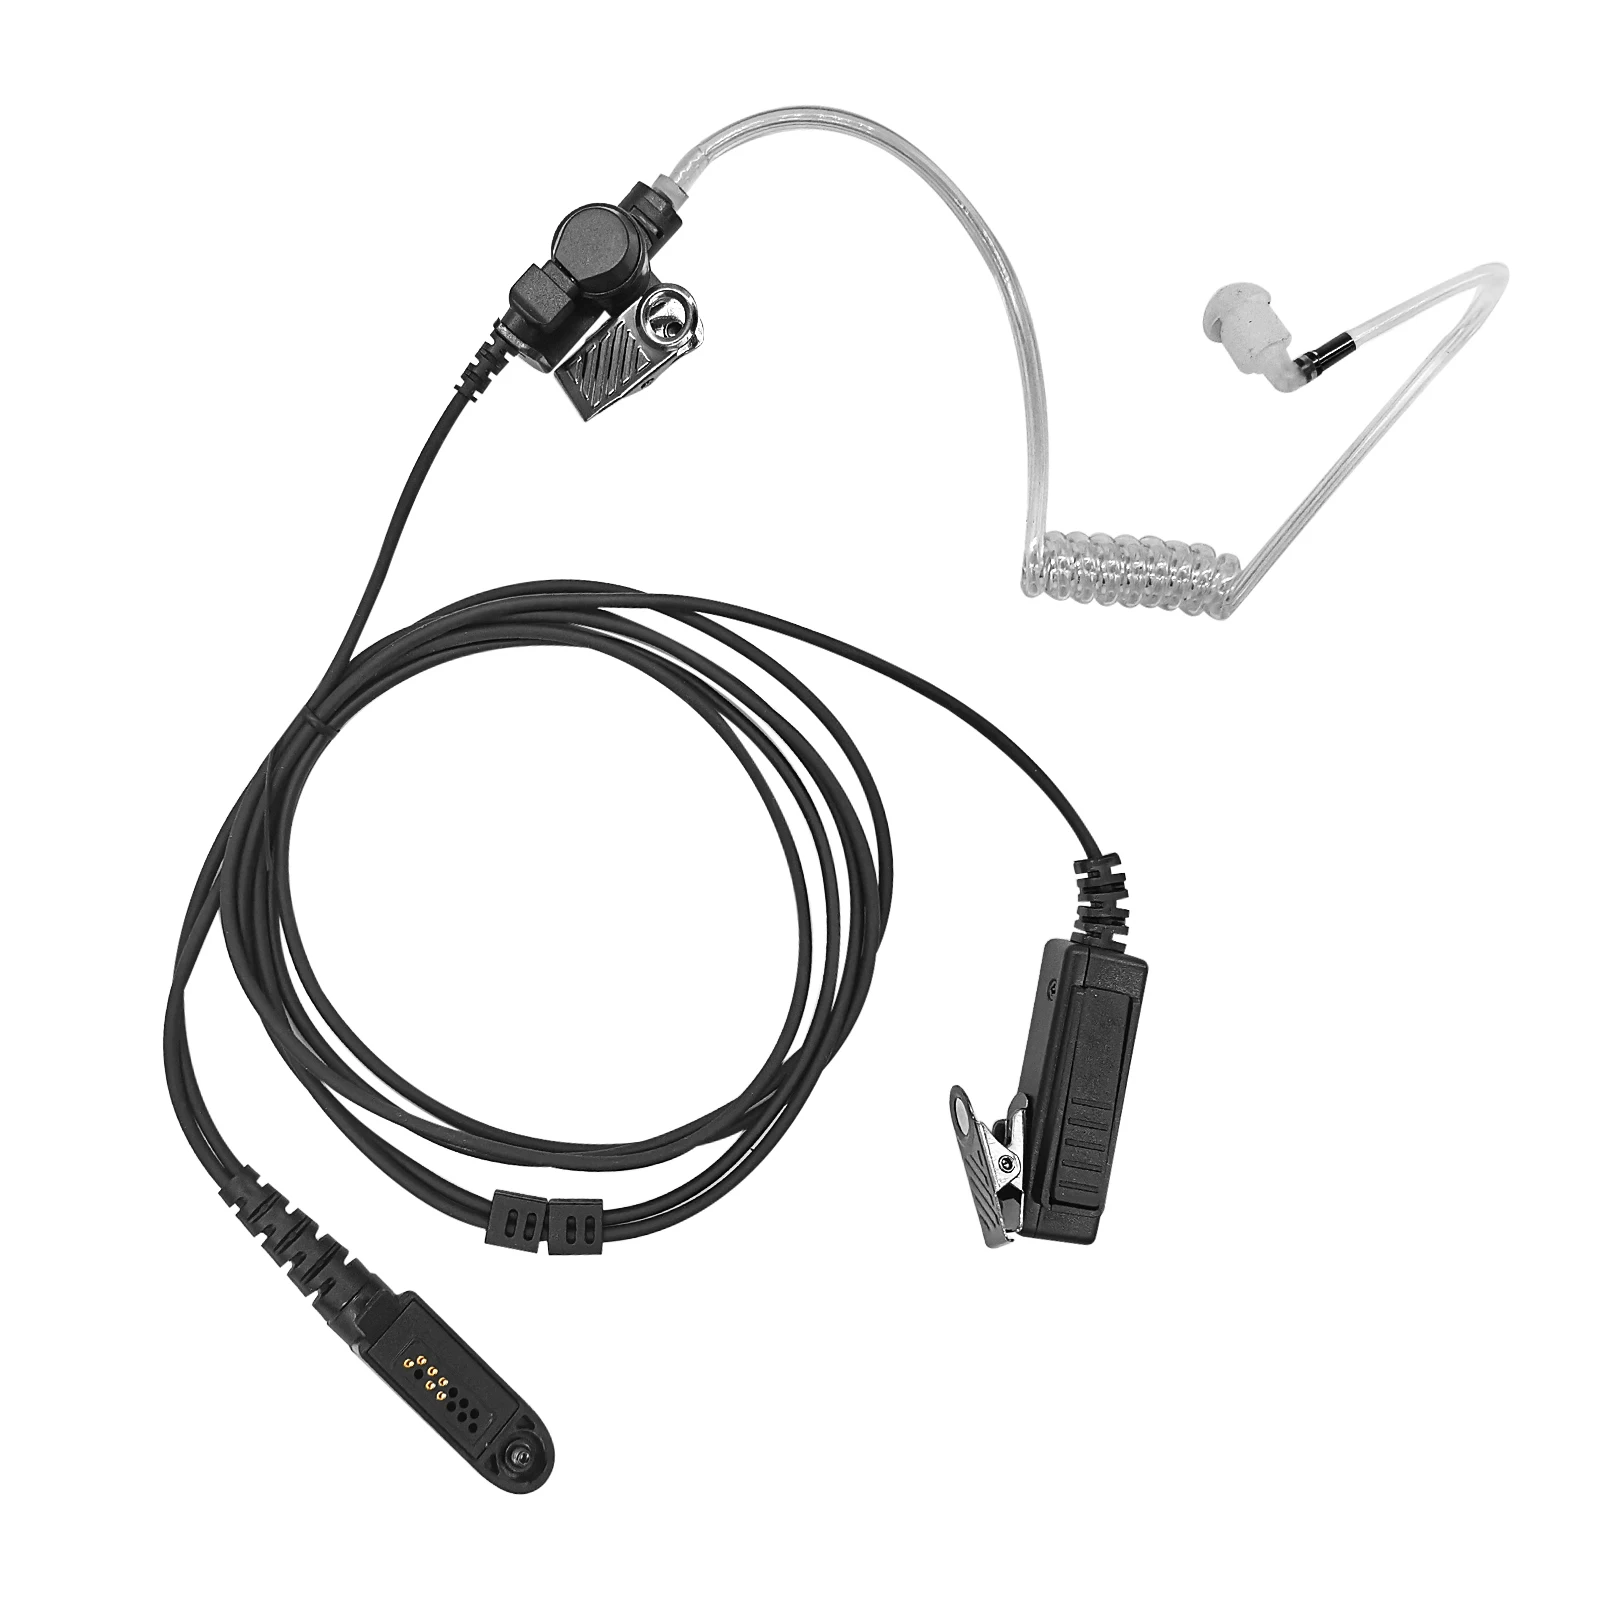 Acoustic Tube Surveillance Earpiece Headset with PTT, 2 Wire Air Covert, for Motorola Radio 2 wire surveillance acoustic tube earpiece mic for motorola mtp3550 mtp3100 mtp3200 mtp3500 dp2400 dp2600 xir p6600 radio